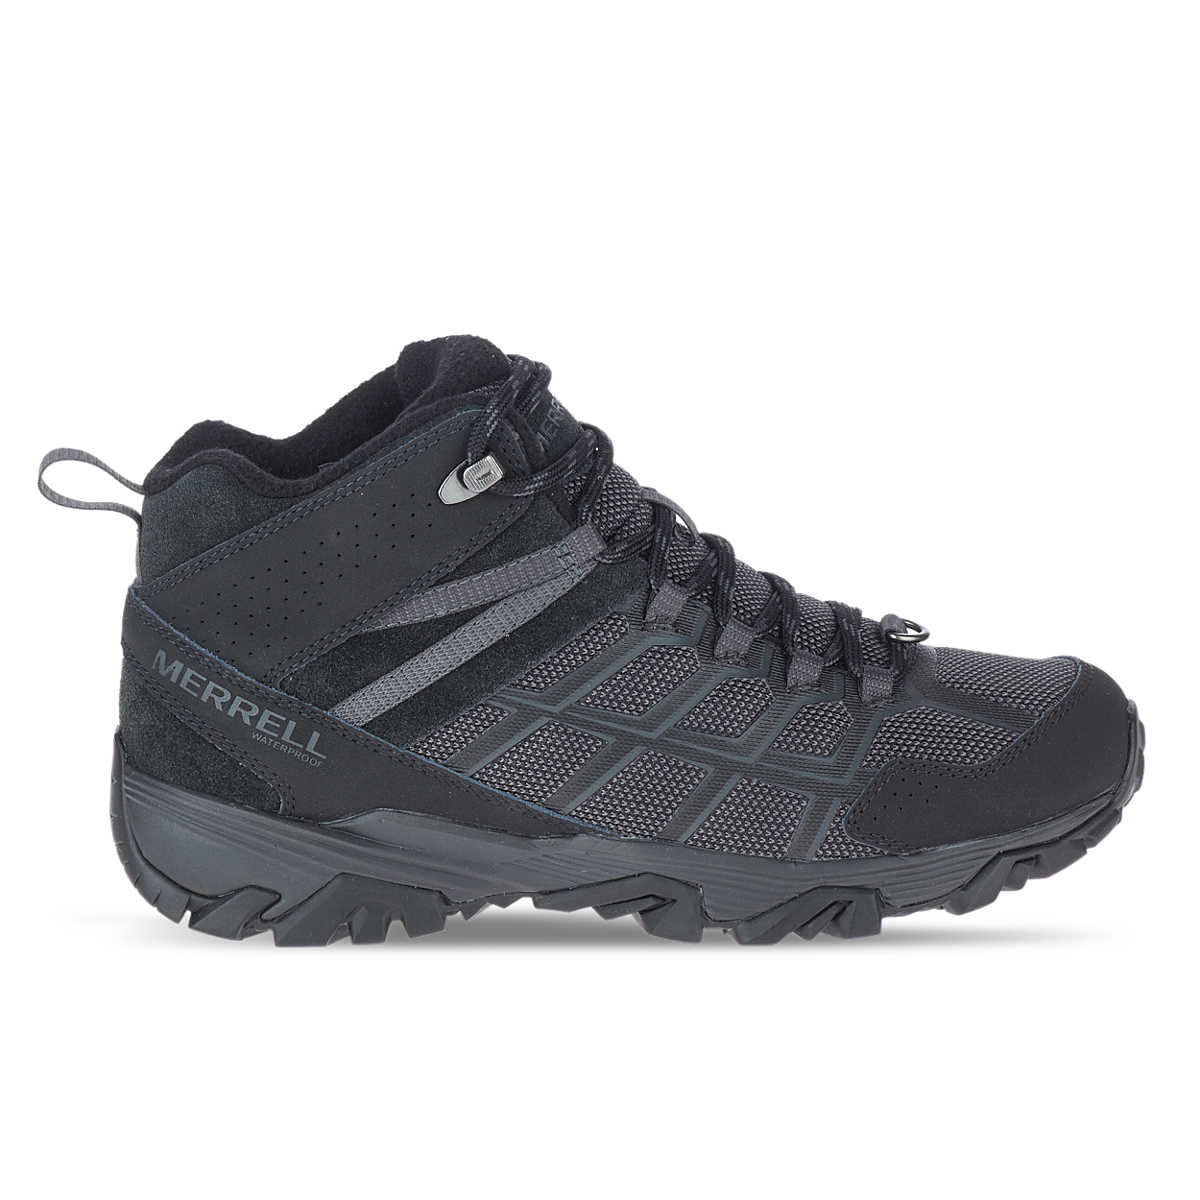 Moab FST 3 Thermo Mid Waterproof, Black, dynamic 1